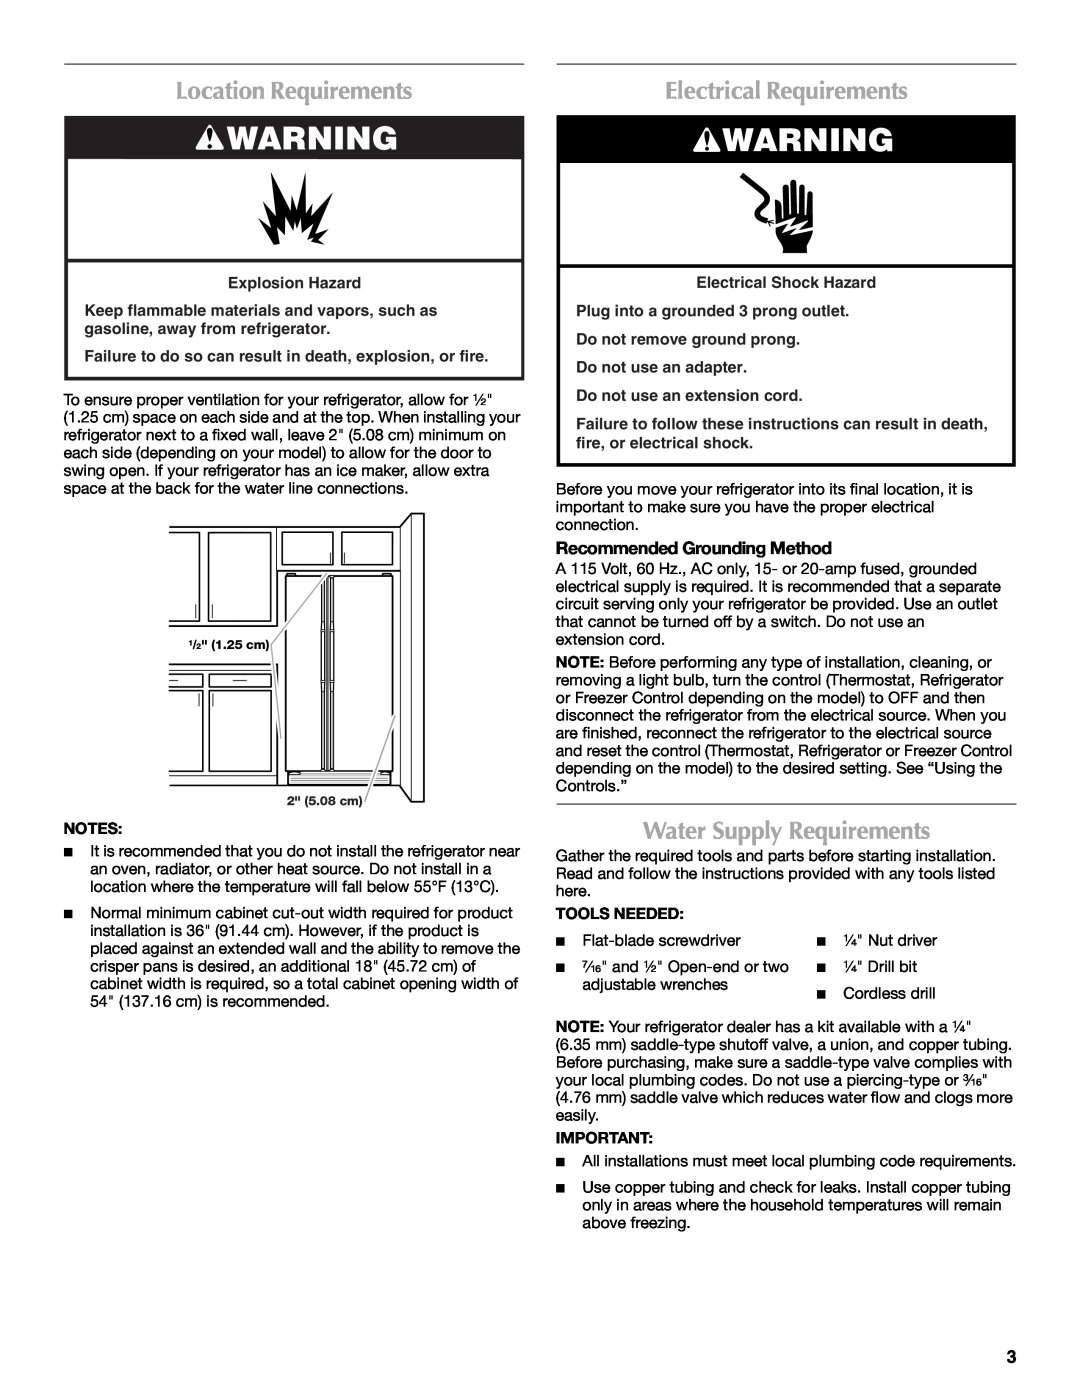 Maytag W10214489A Location Requirements, Electrical Requirements, Water Supply Requirements, Recommended Grounding Method 